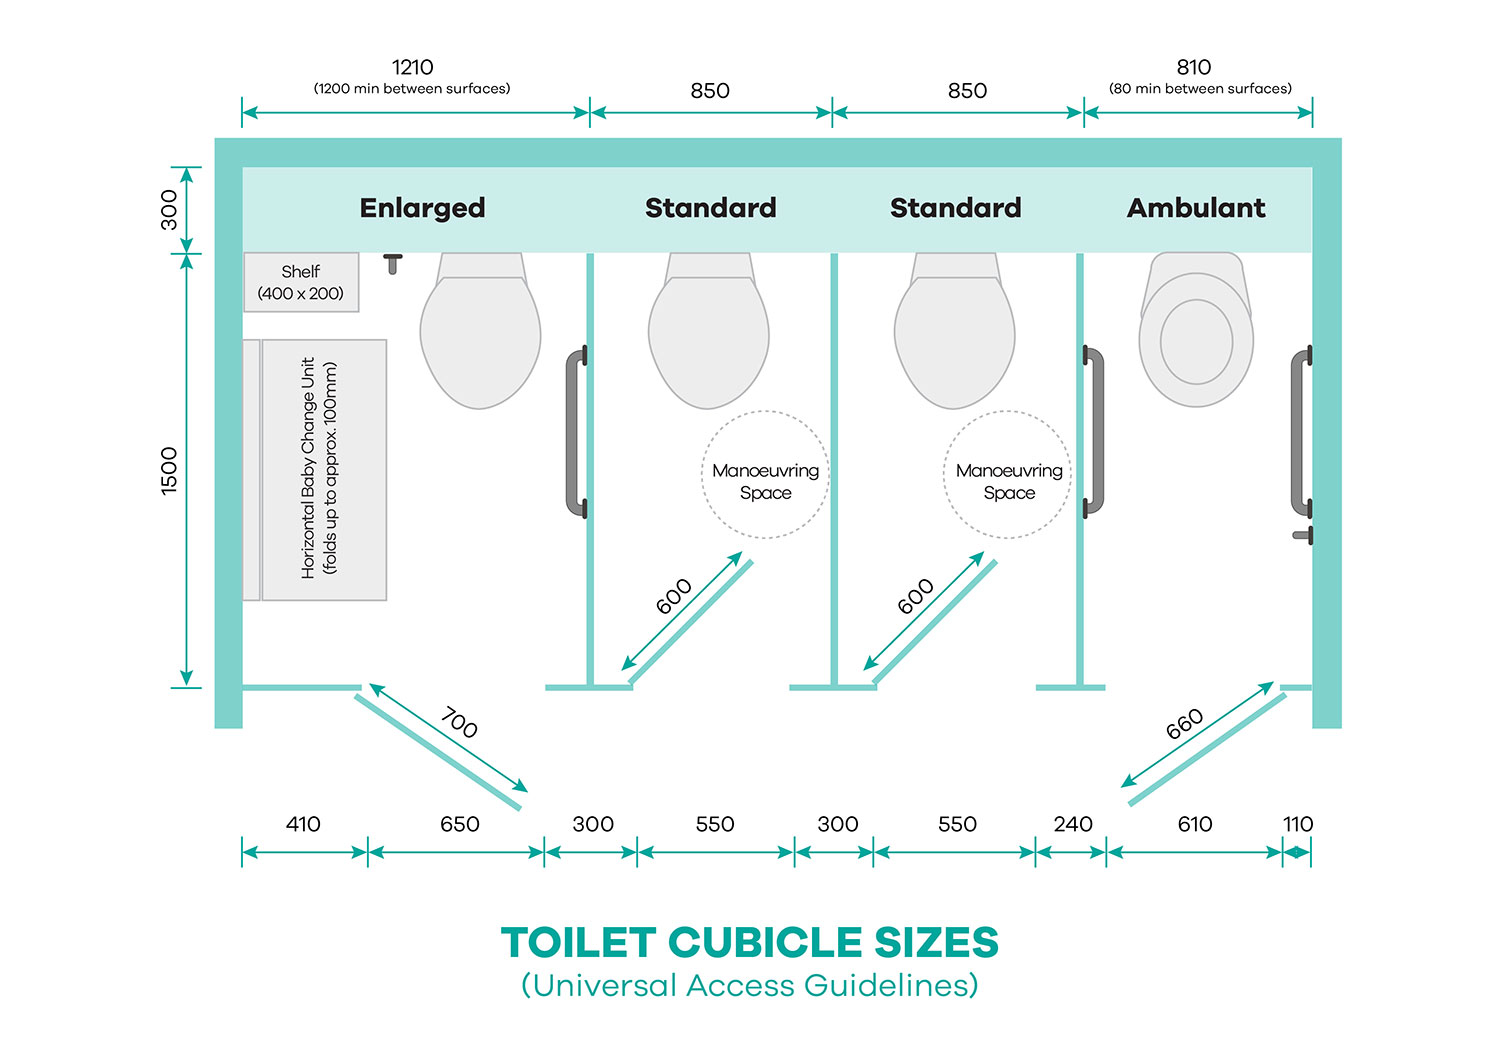 Water Closet Dimensions In Mm - Image of Bathroom and Closet